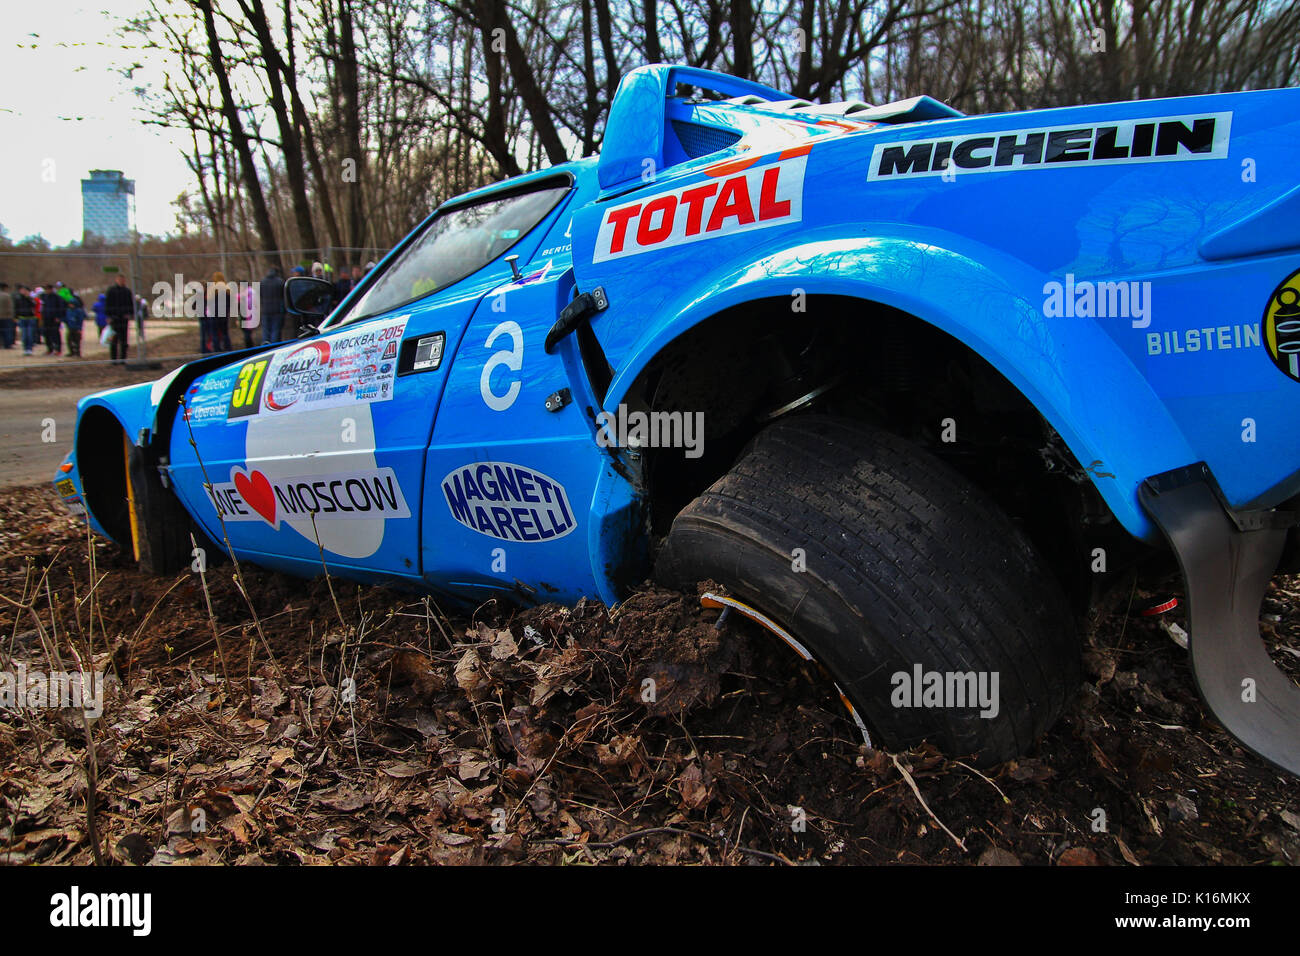 Moscow, Russia - Apr 18, 2015: Crash of the Lancia Stratos HF russian driver Alibekov Alexandr and co-driver Uperenko Oleg at the Rally Masters Show. Stock Photo